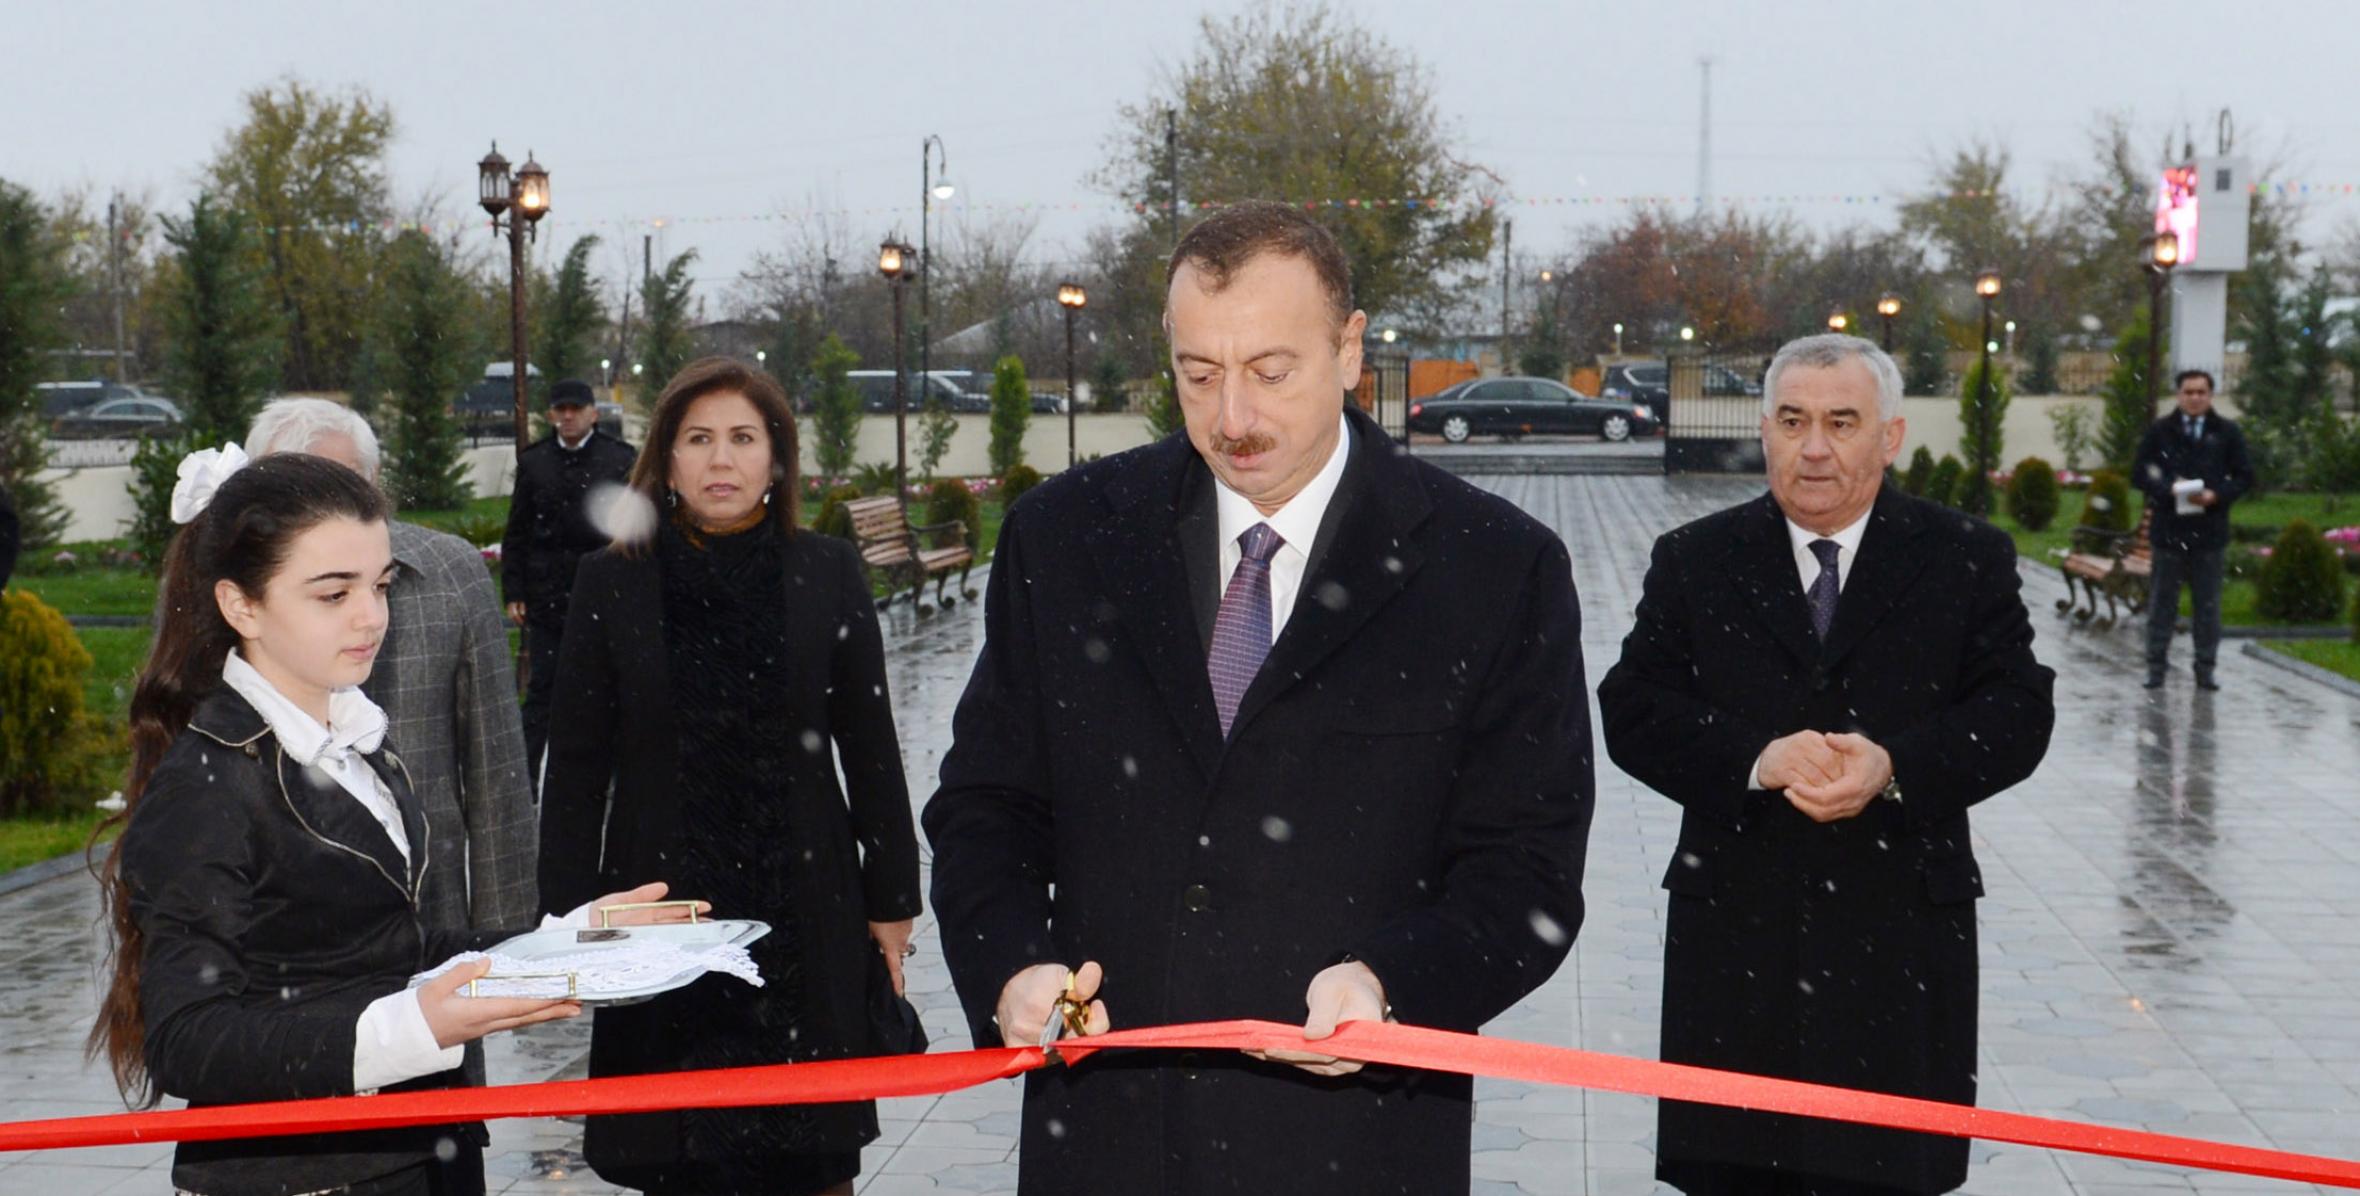 Ilham Aliyev attended the opening of a new building of the Fuzuli District branch of the “Yeni Azerbaijan Party” in Horadiz